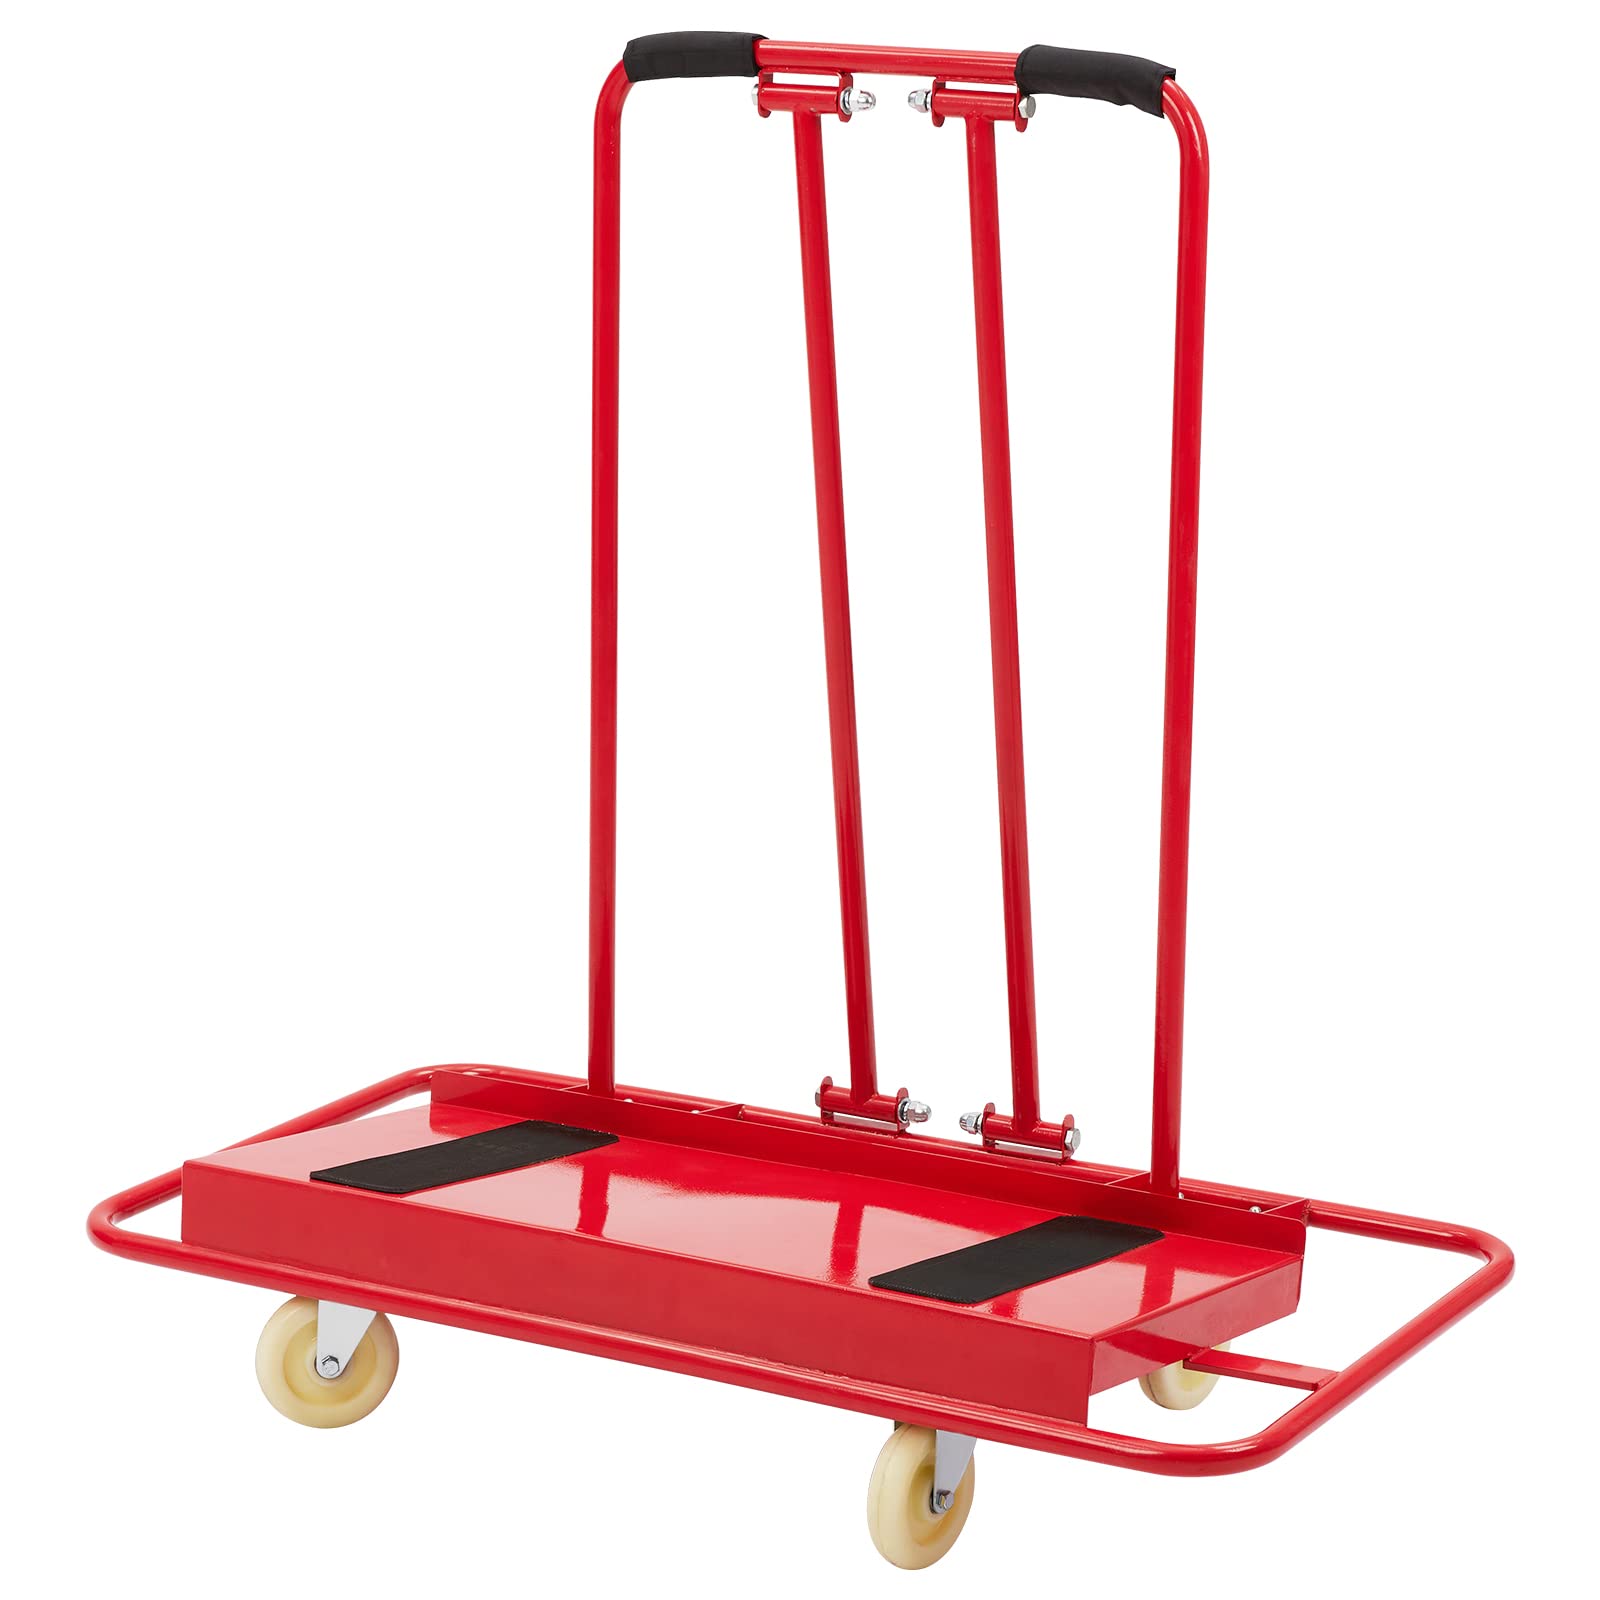 GARVEE Drywall Cart 1600Lbs Load Capacity Heavy Duty Panel Dolly Cart with Four Swivel Casters Red